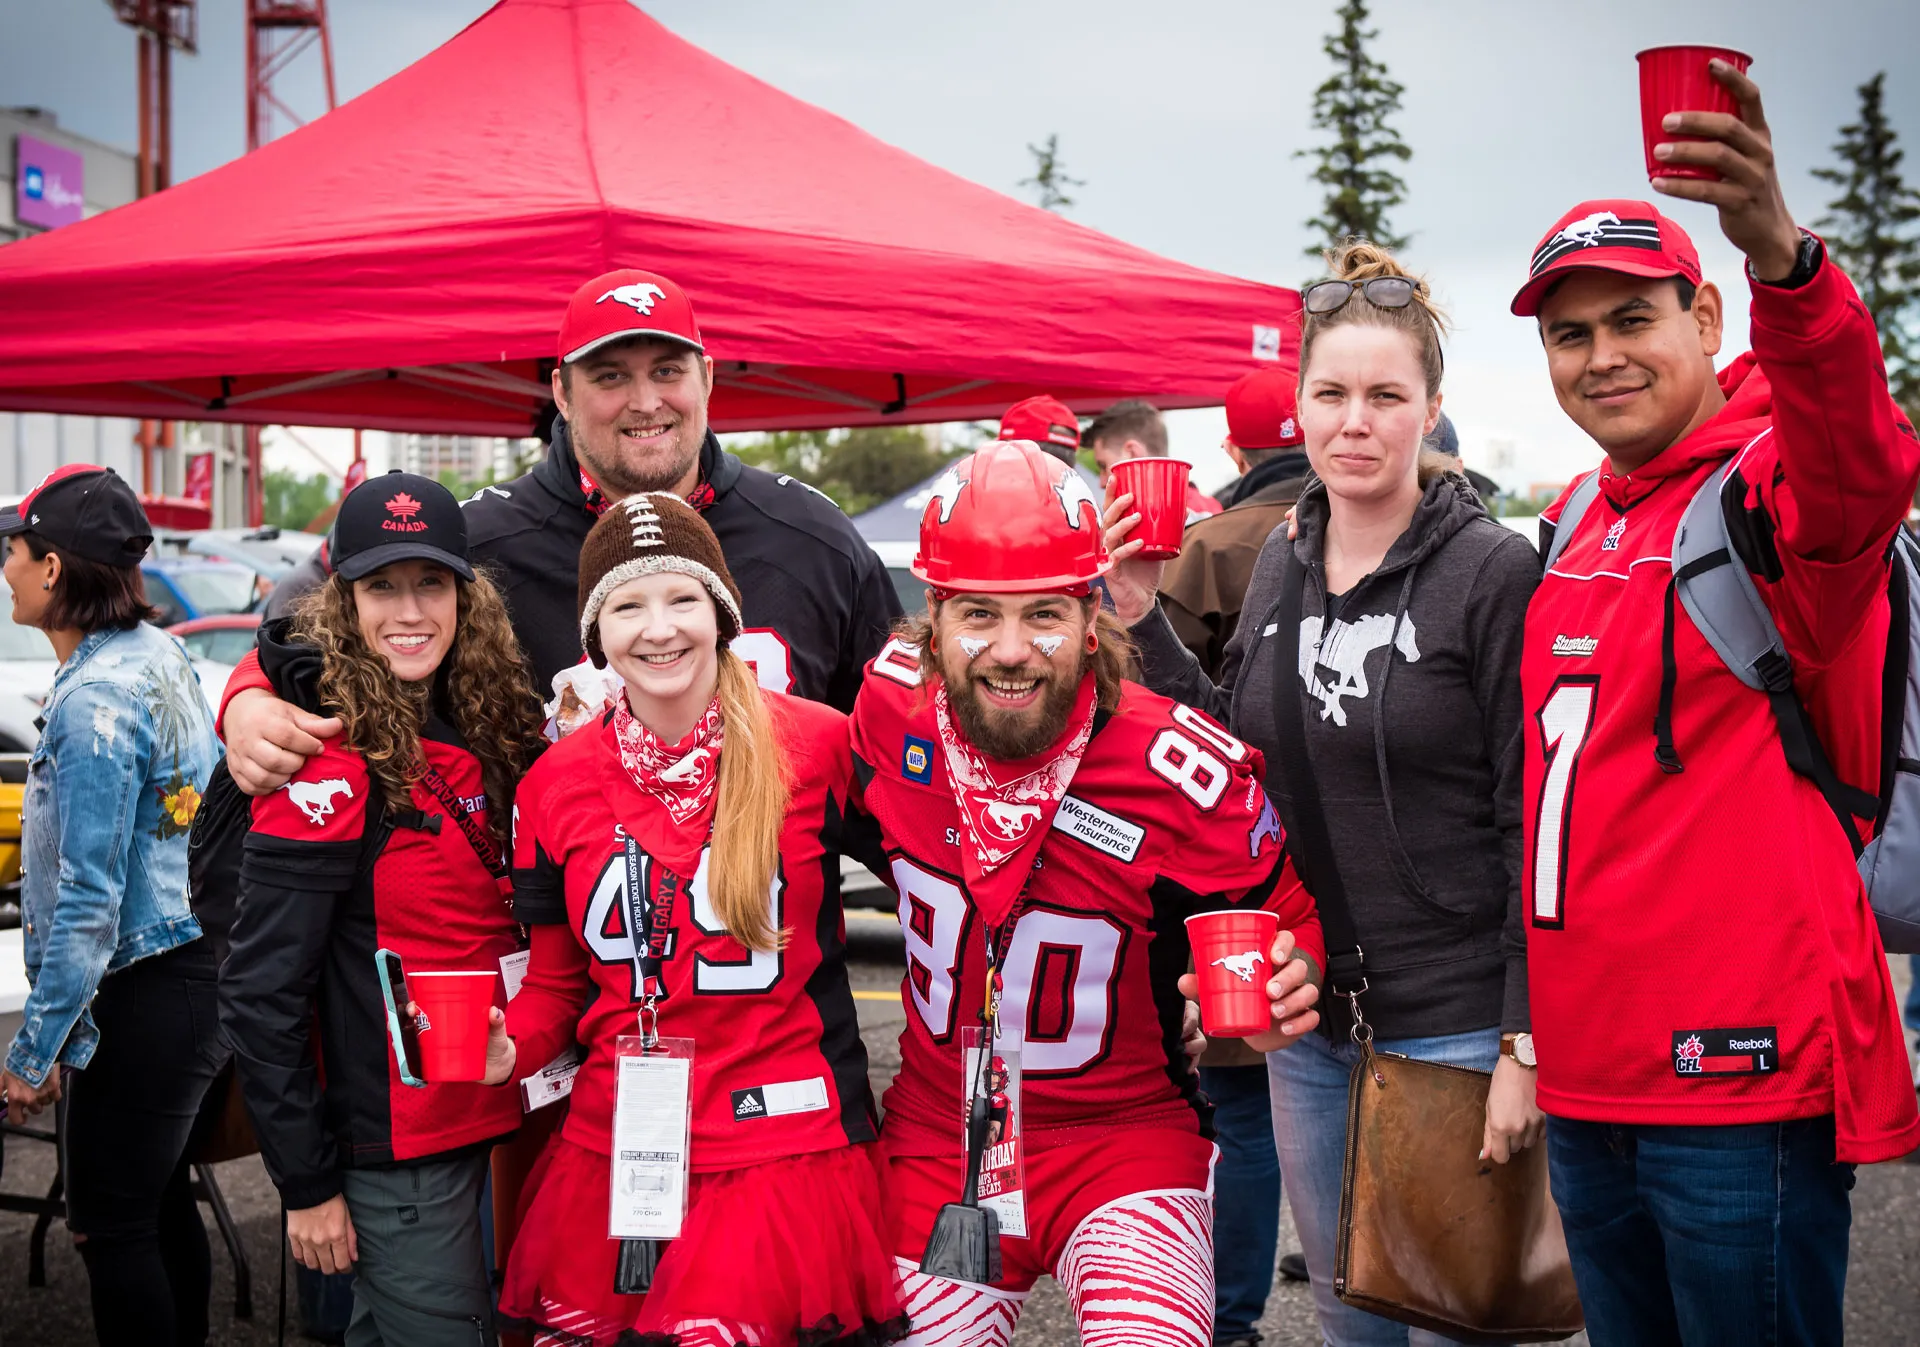 Tailgating outside the Calgary Stampeders Football game.